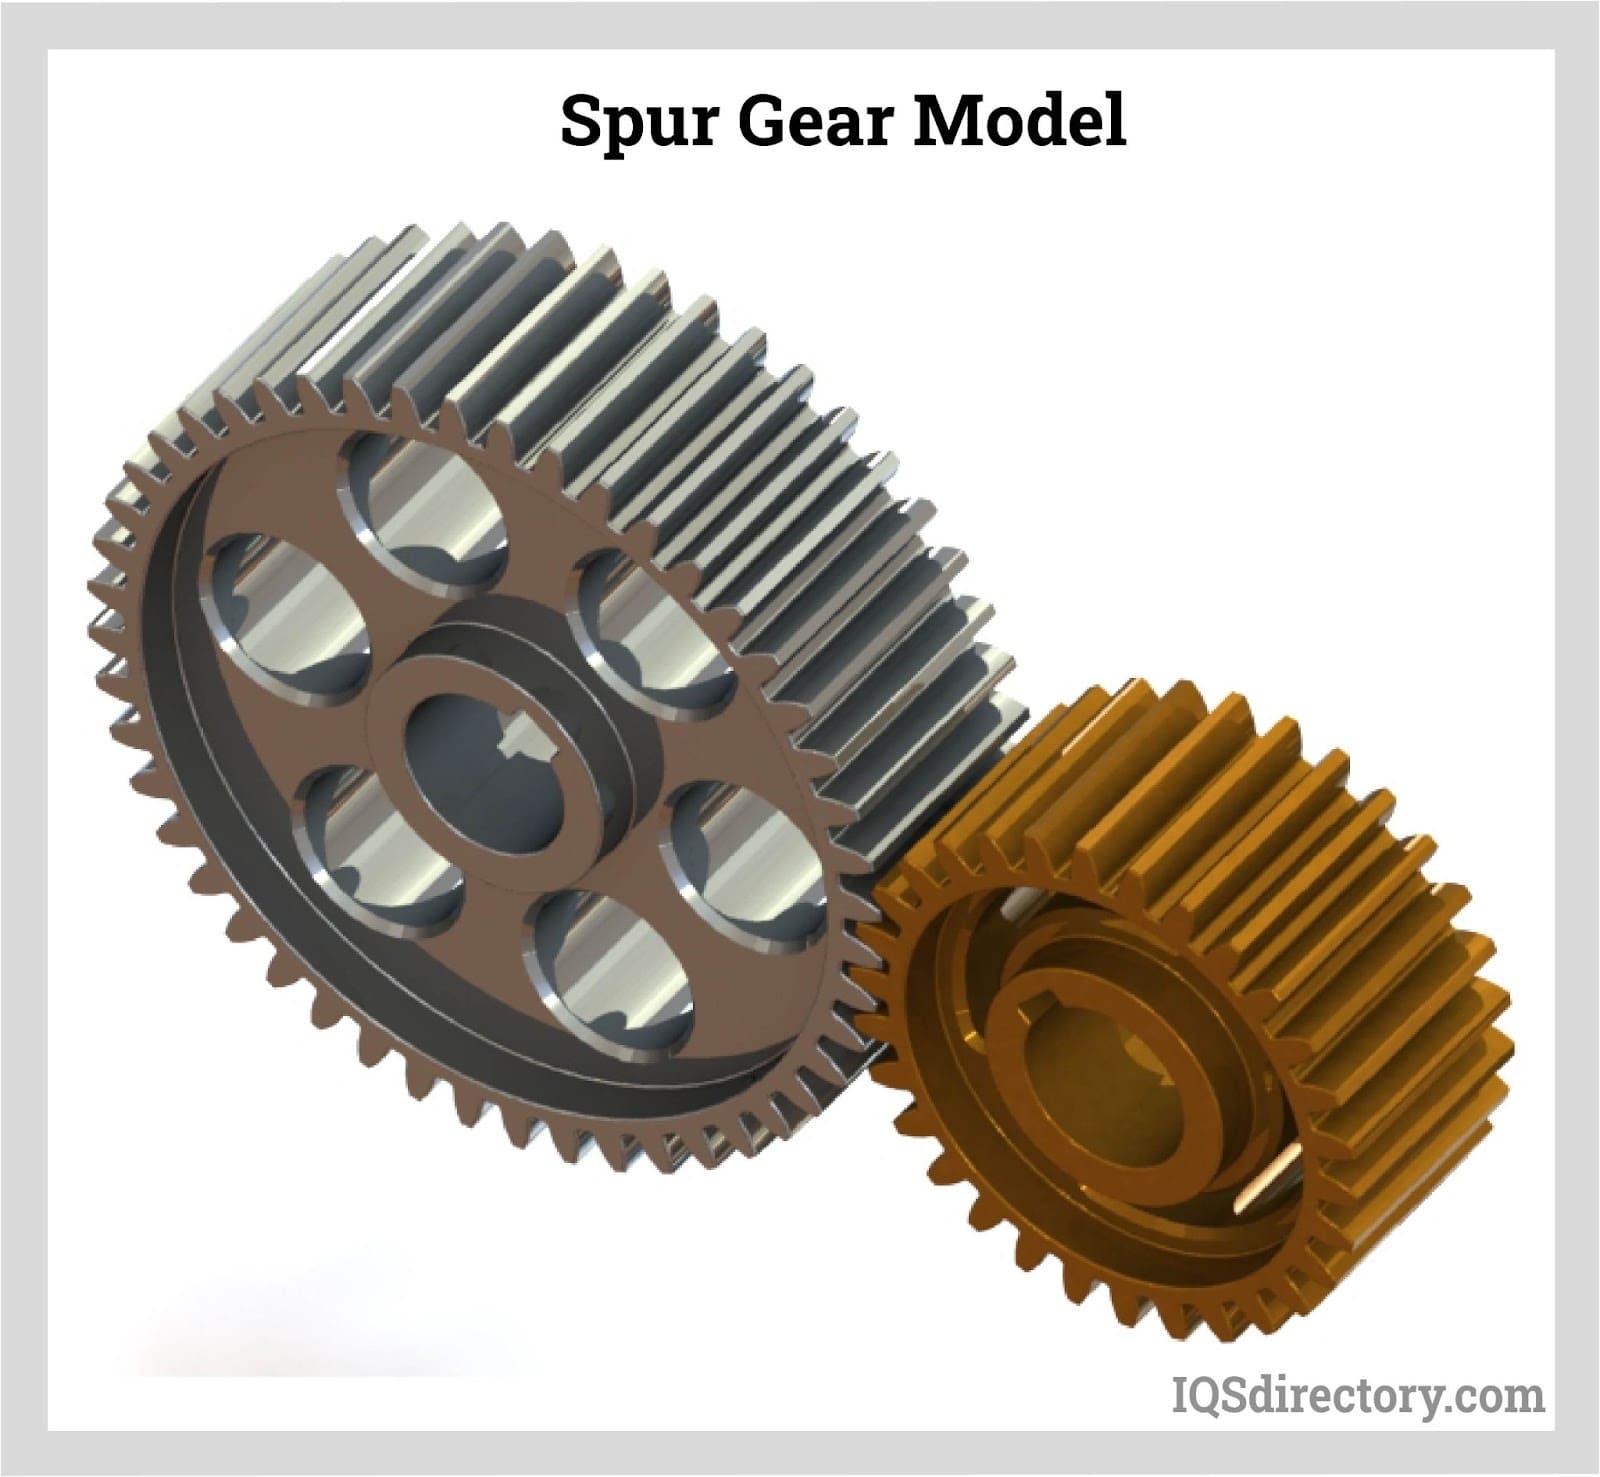 Gear Definition & Meaning